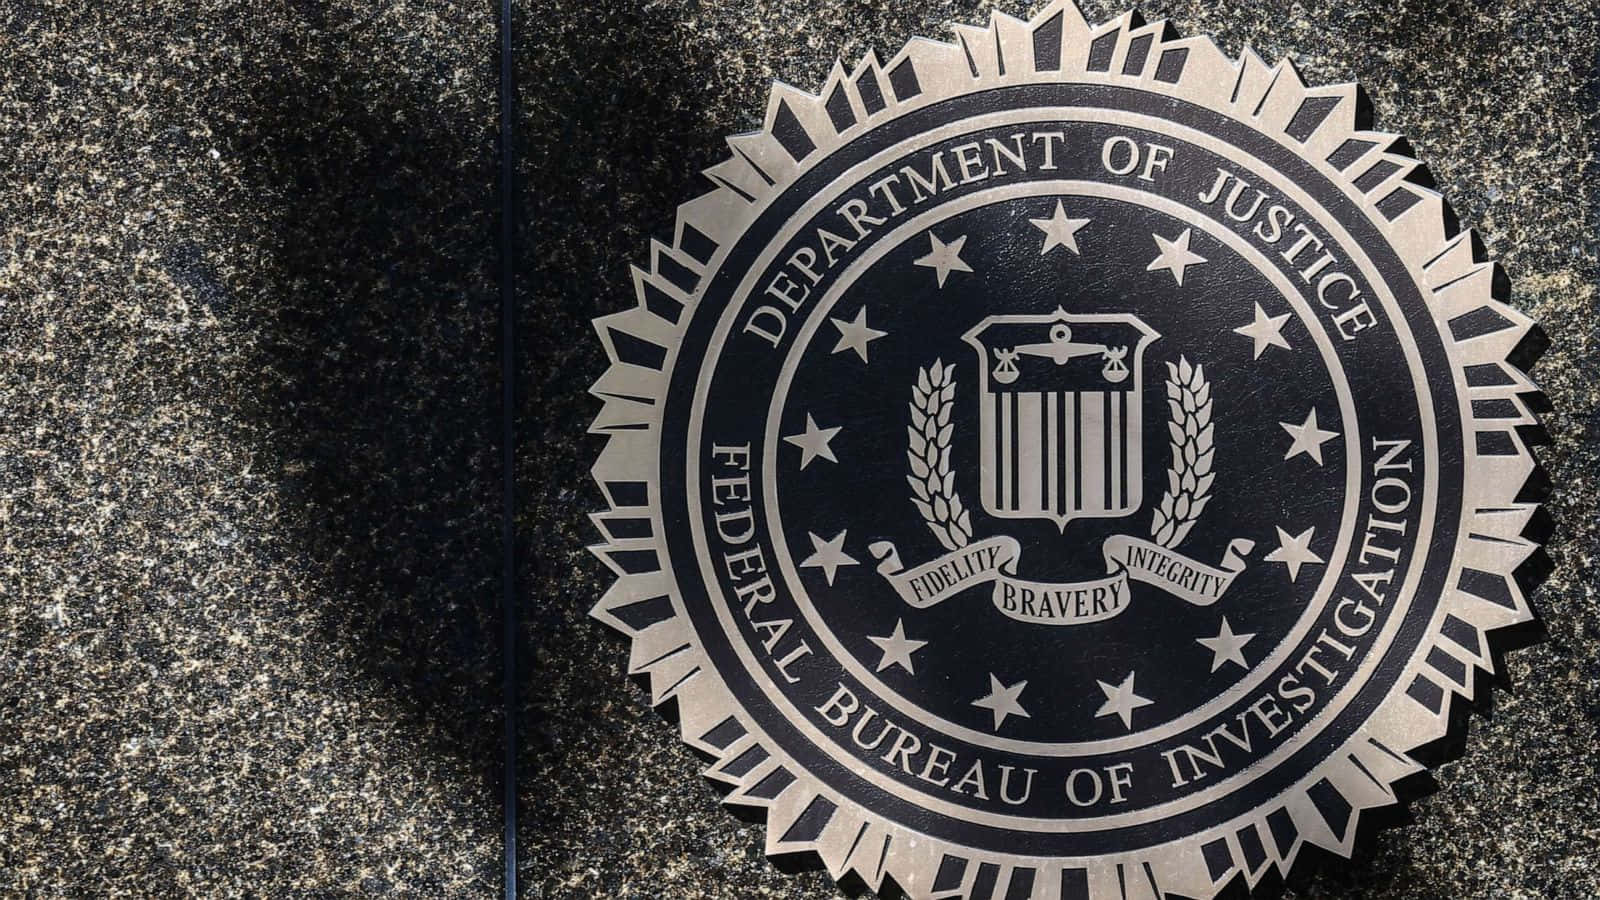 The Fbi Logo Is Seen On The Wall Of The Building